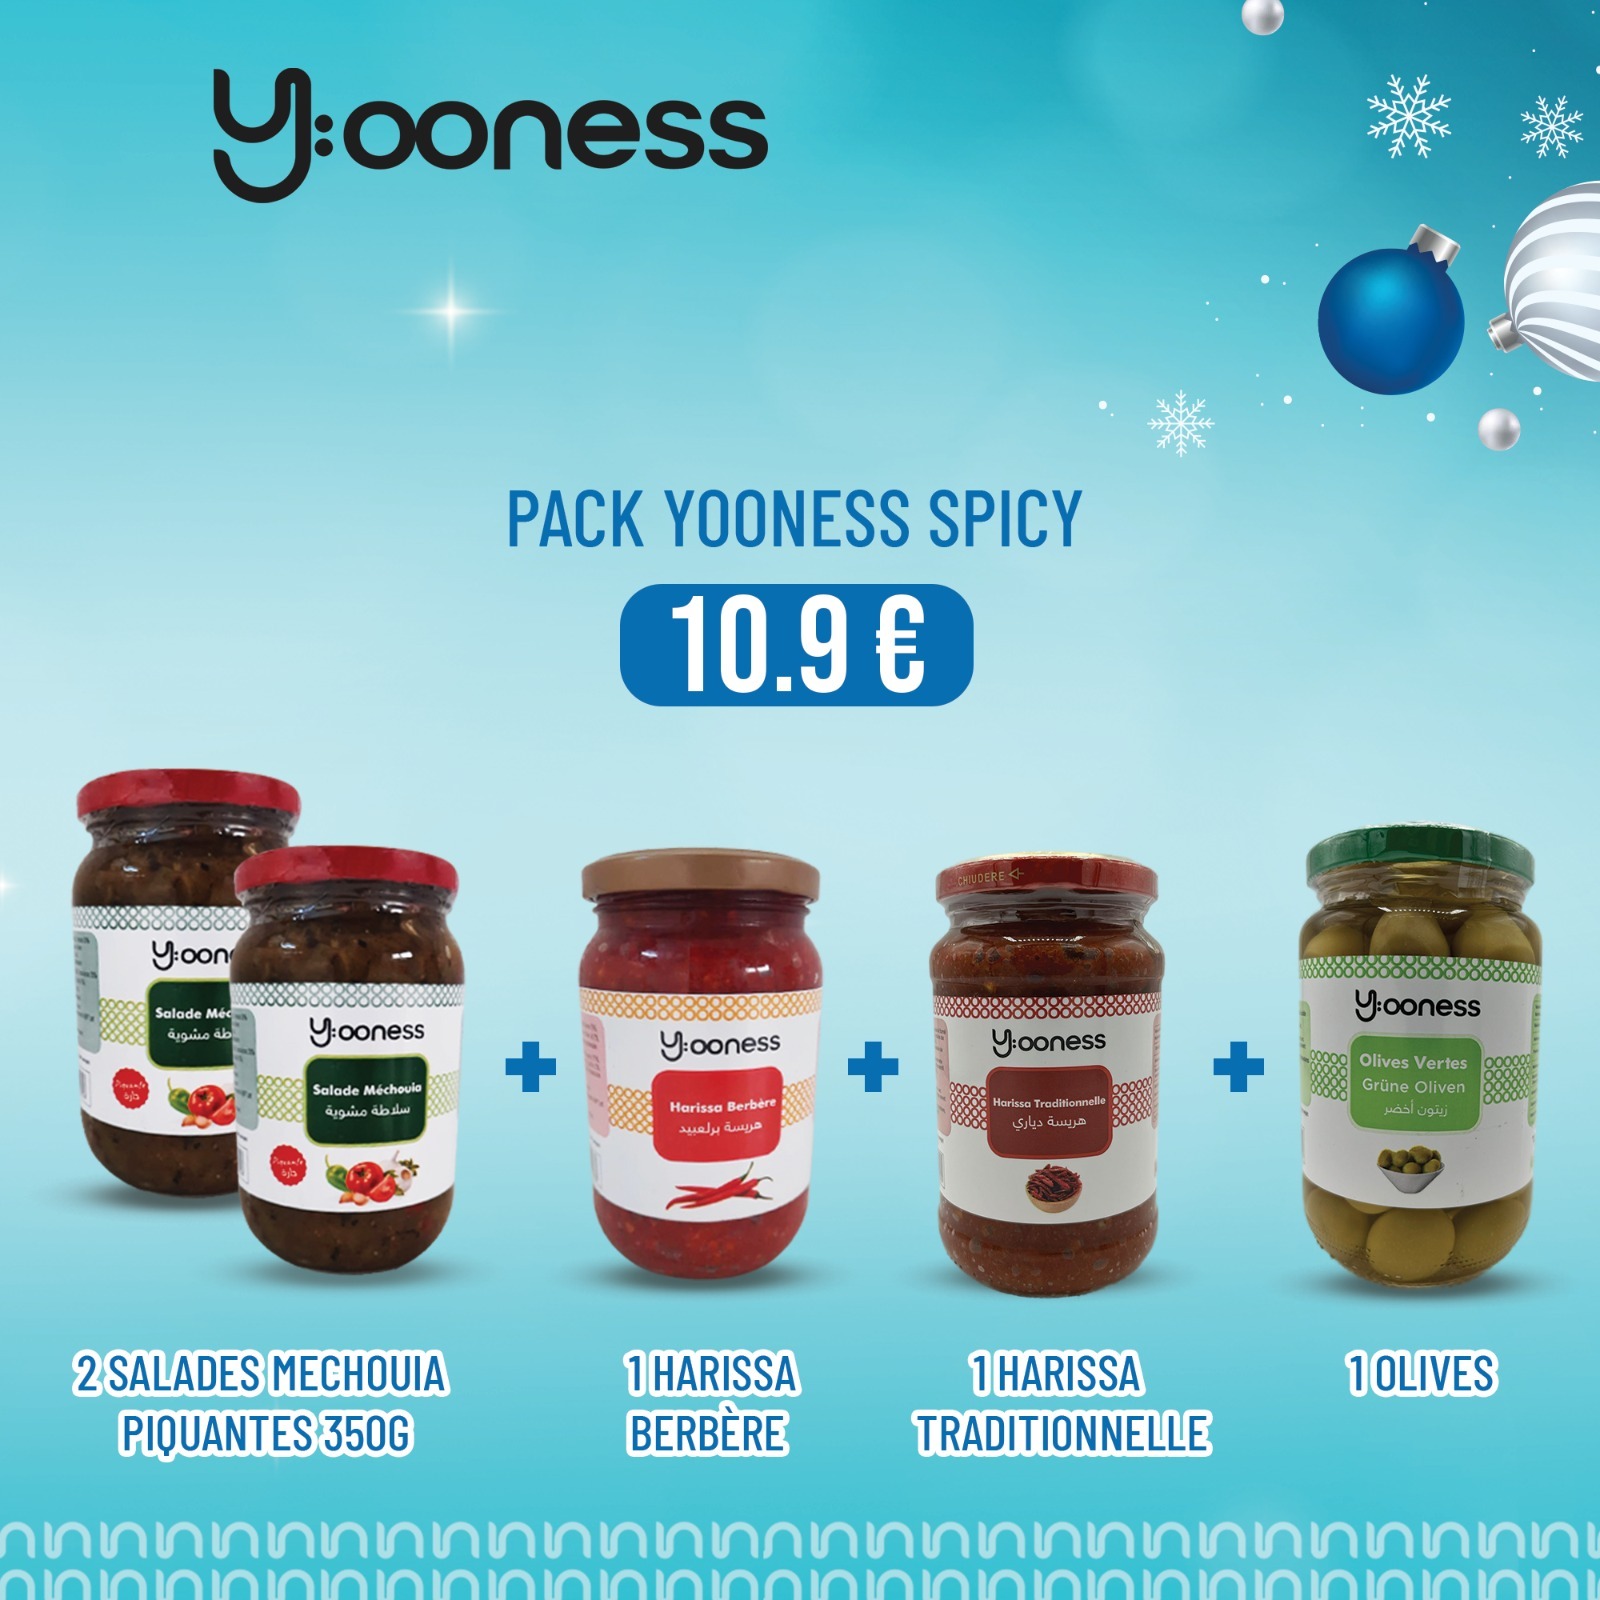 PACK YOONESS SPICY